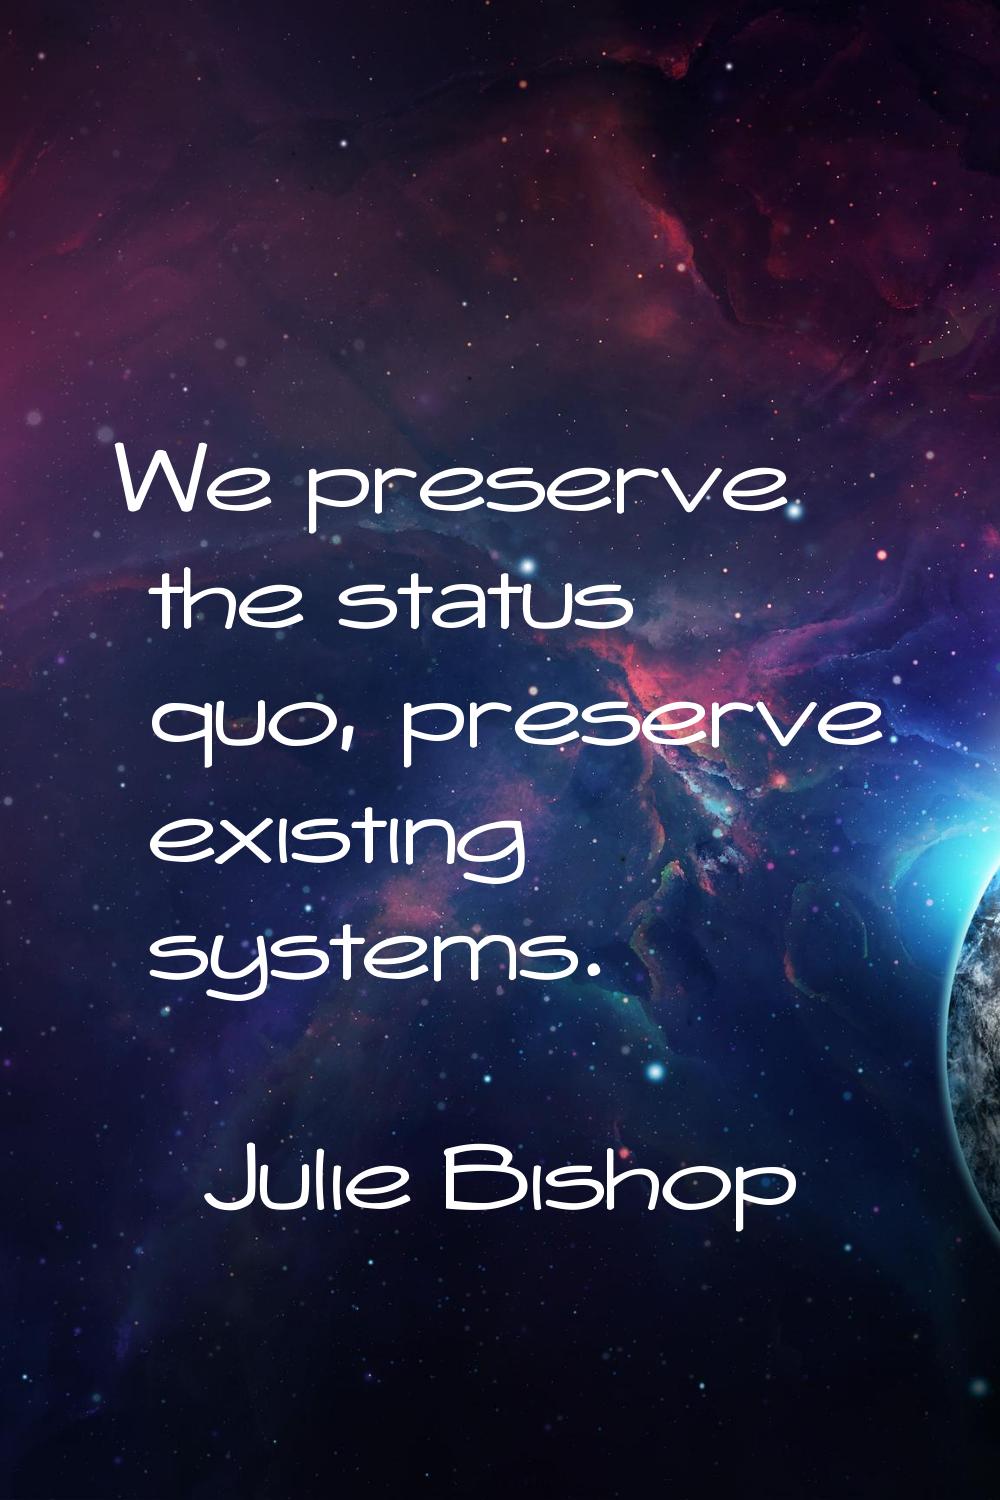 We preserve the status quo, preserve existing systems.